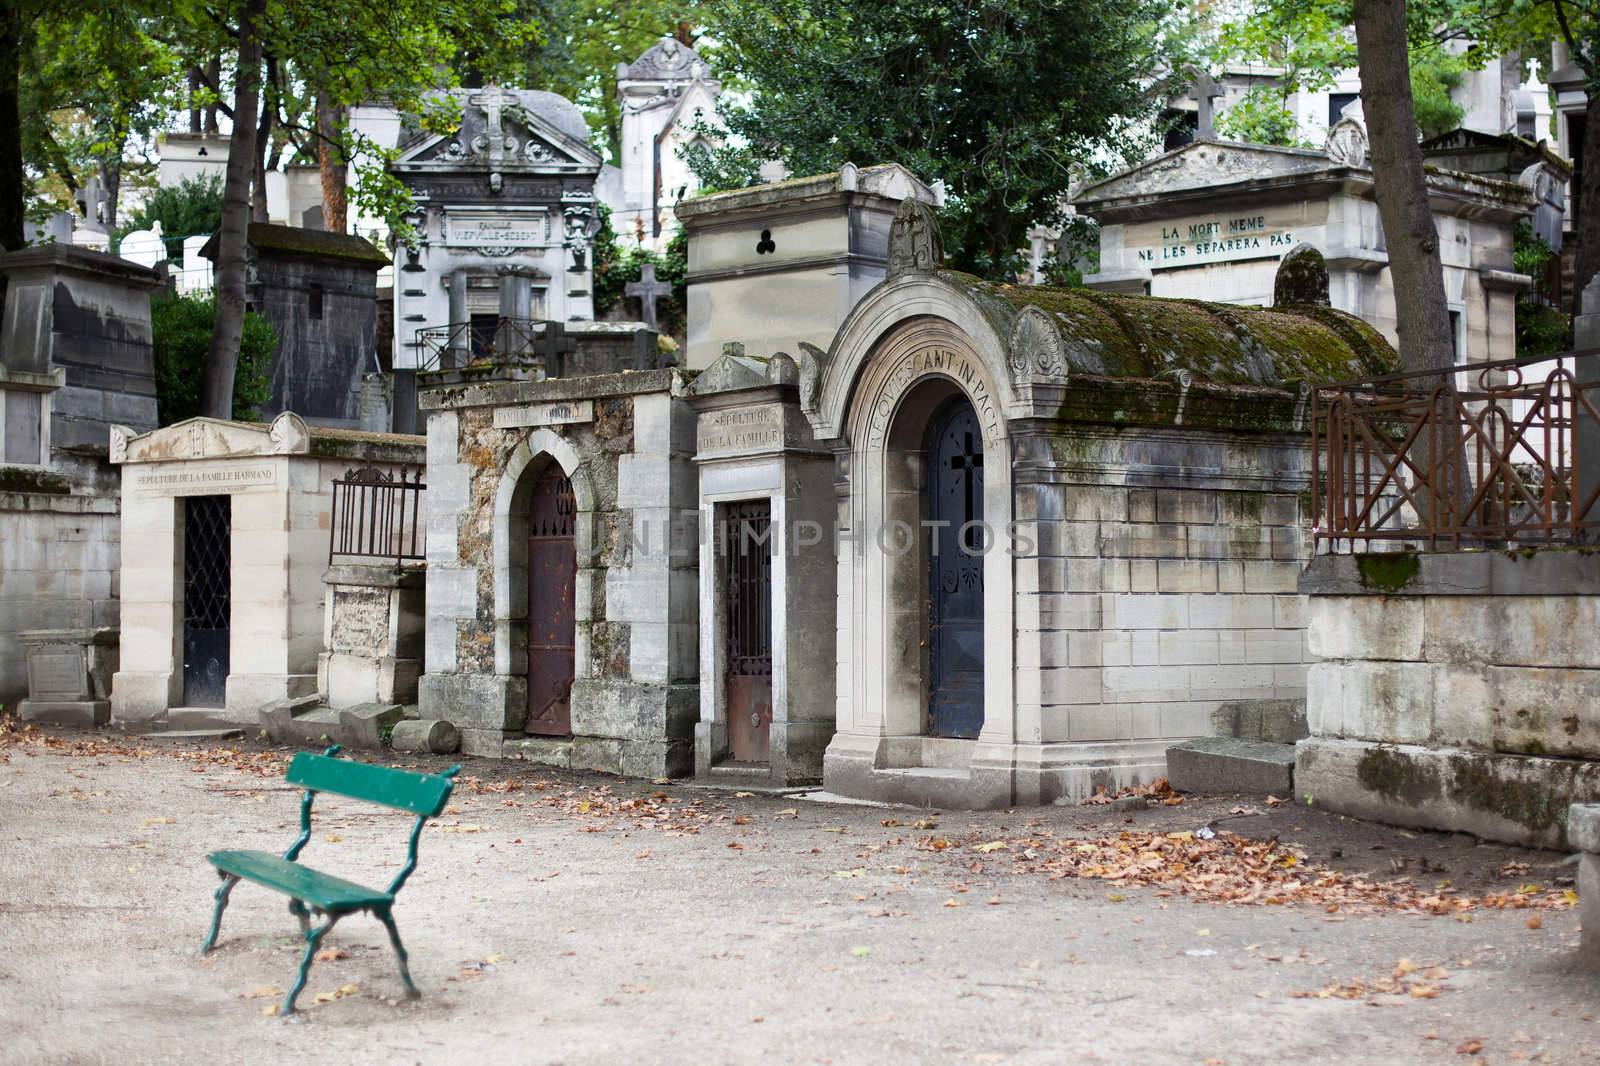 The most famous cemetery in Paris - Pere Lachaise